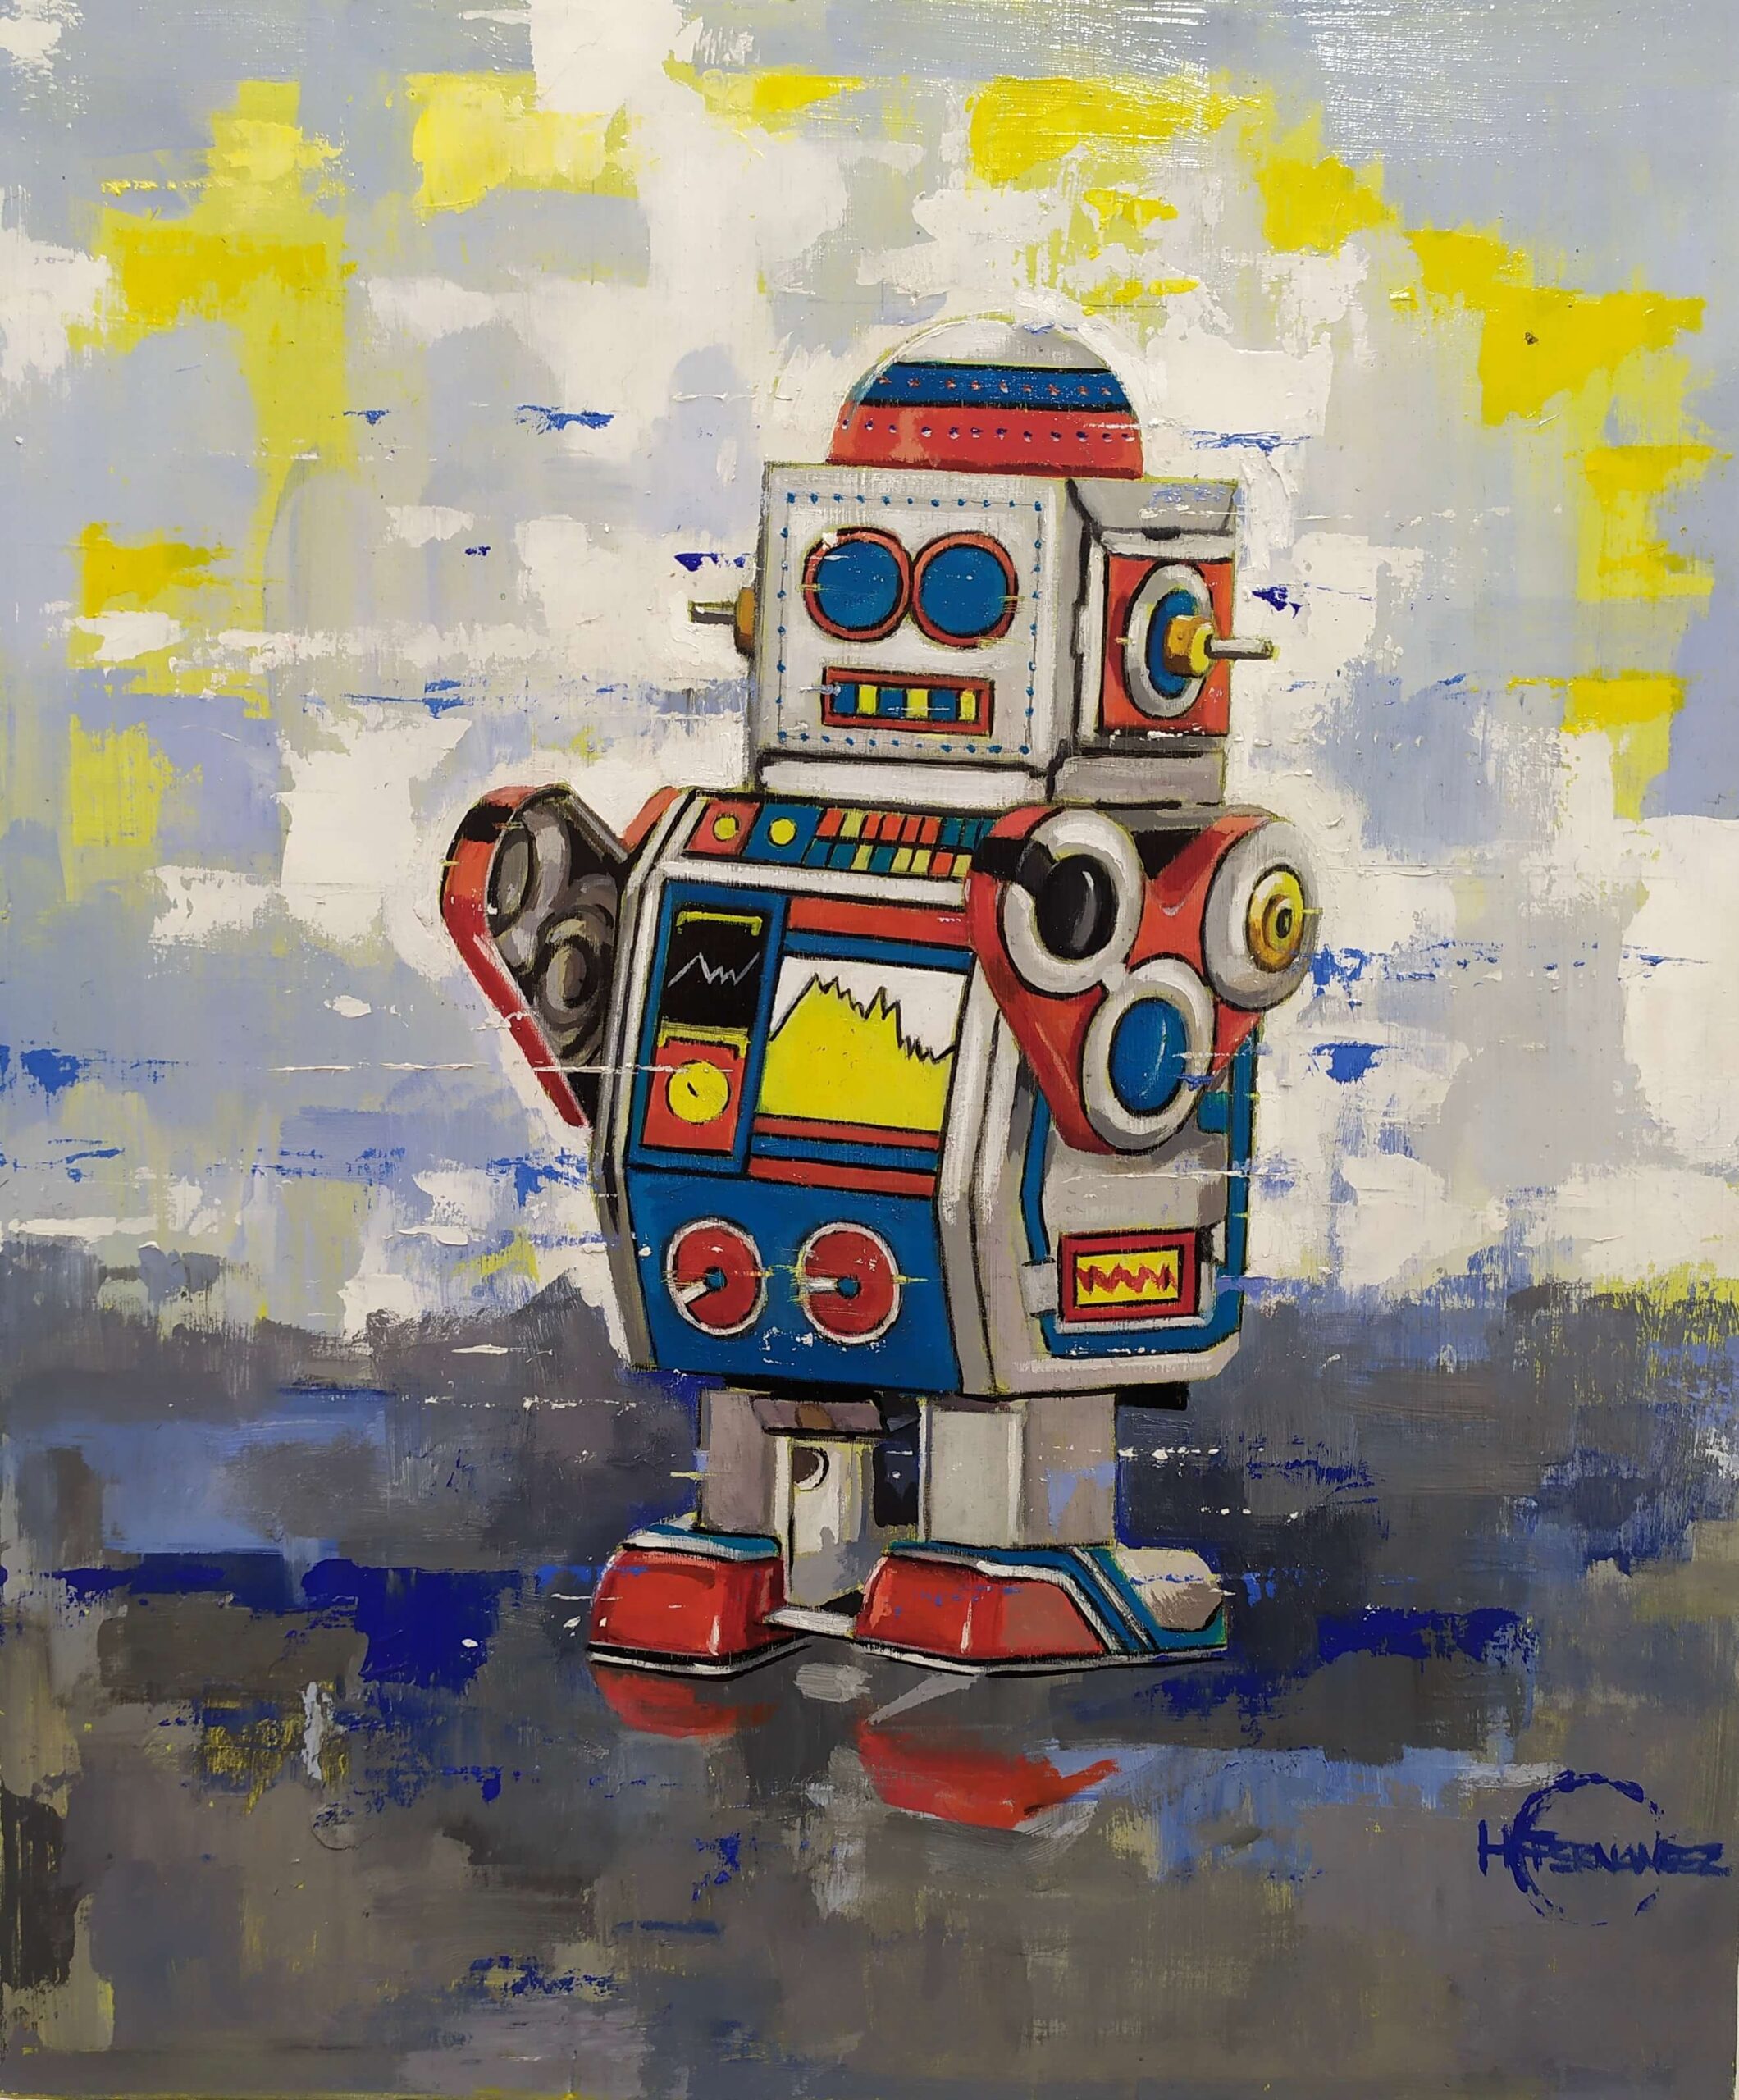 SMALL ROBOT - Painting